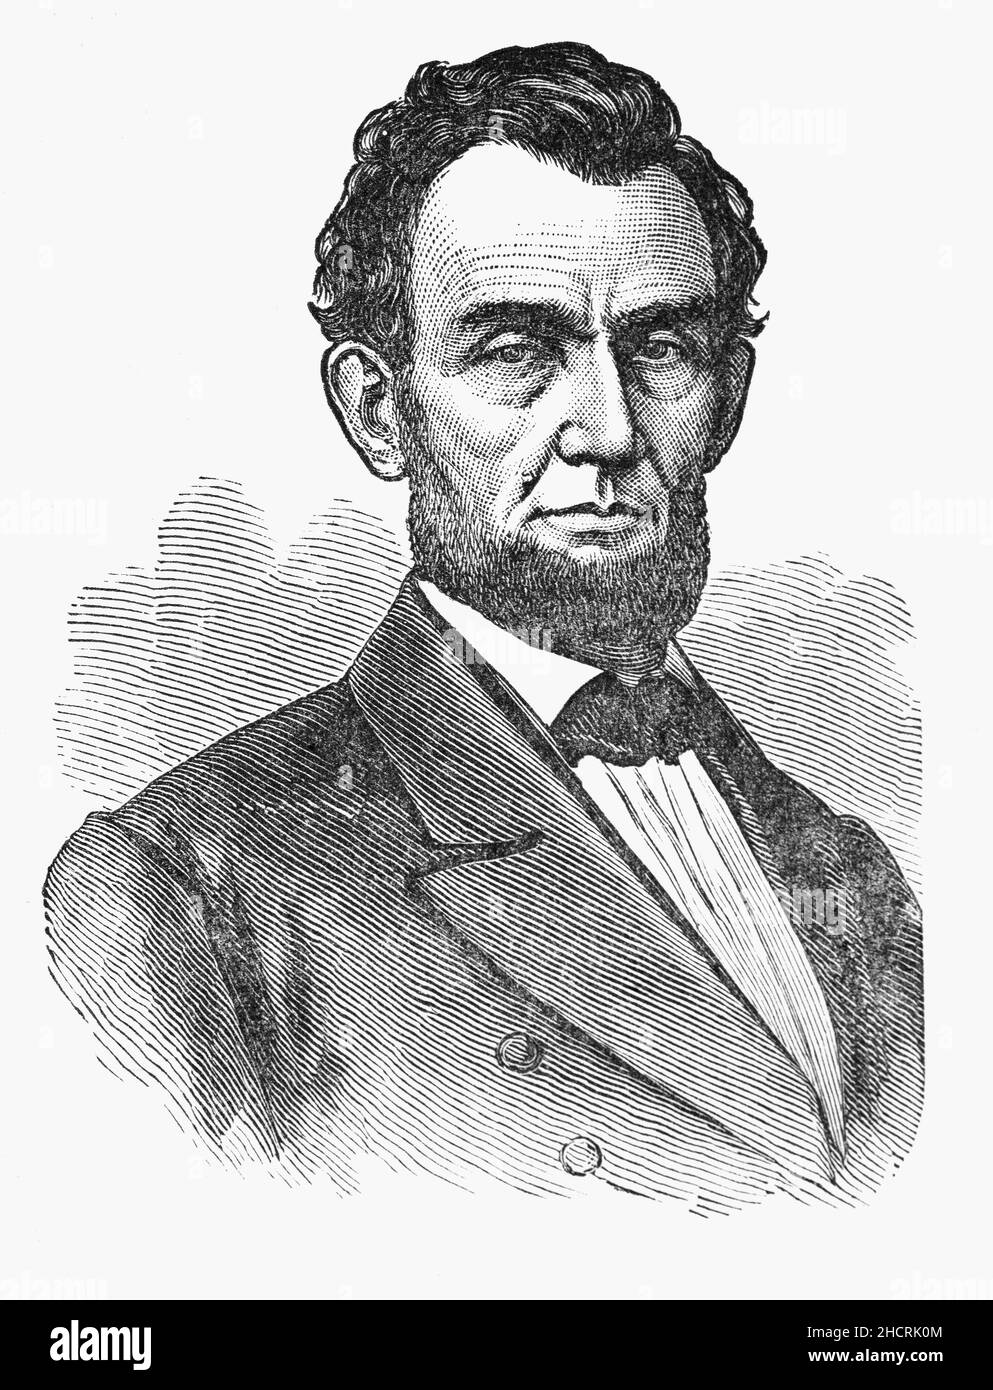 A late 19th Century portrait of Abraham Lincoln (1809-1865), an American lawyer and statesman who served as the 16th president of the United States from 1861 until his assassination in 1865. Lincoln led the nation through the American Civil War and succeeded in preserving the Union, abolishing slavery, bolstering the federal government, and modernizing the U.S. economy. Stock Photo